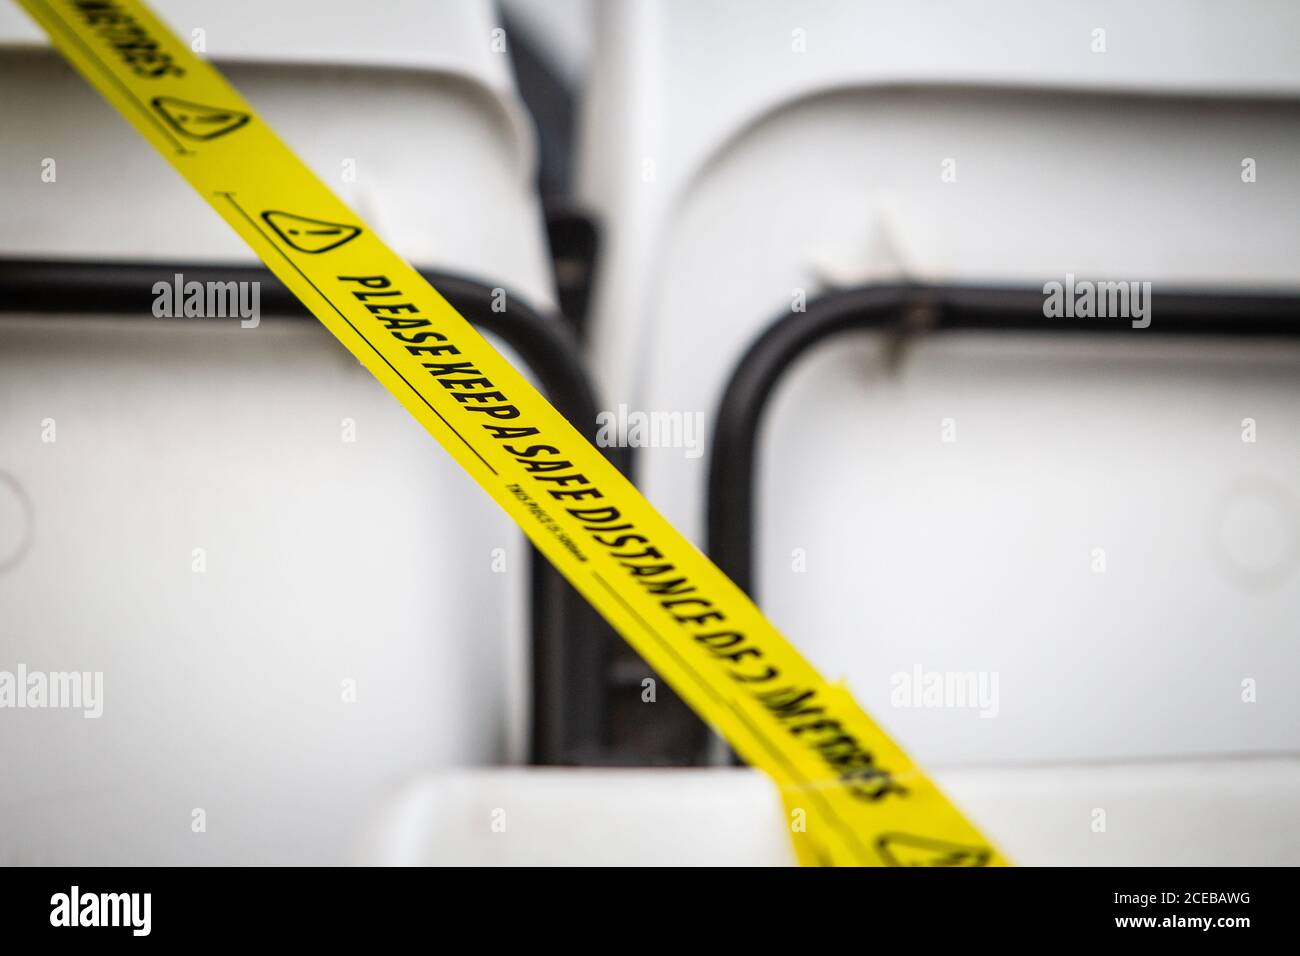 Close up of safe distance tape stretched across seating in sports stadium keeping spectators, fans, staff socially distanced during Covid 19 pandemic. Stock Photo